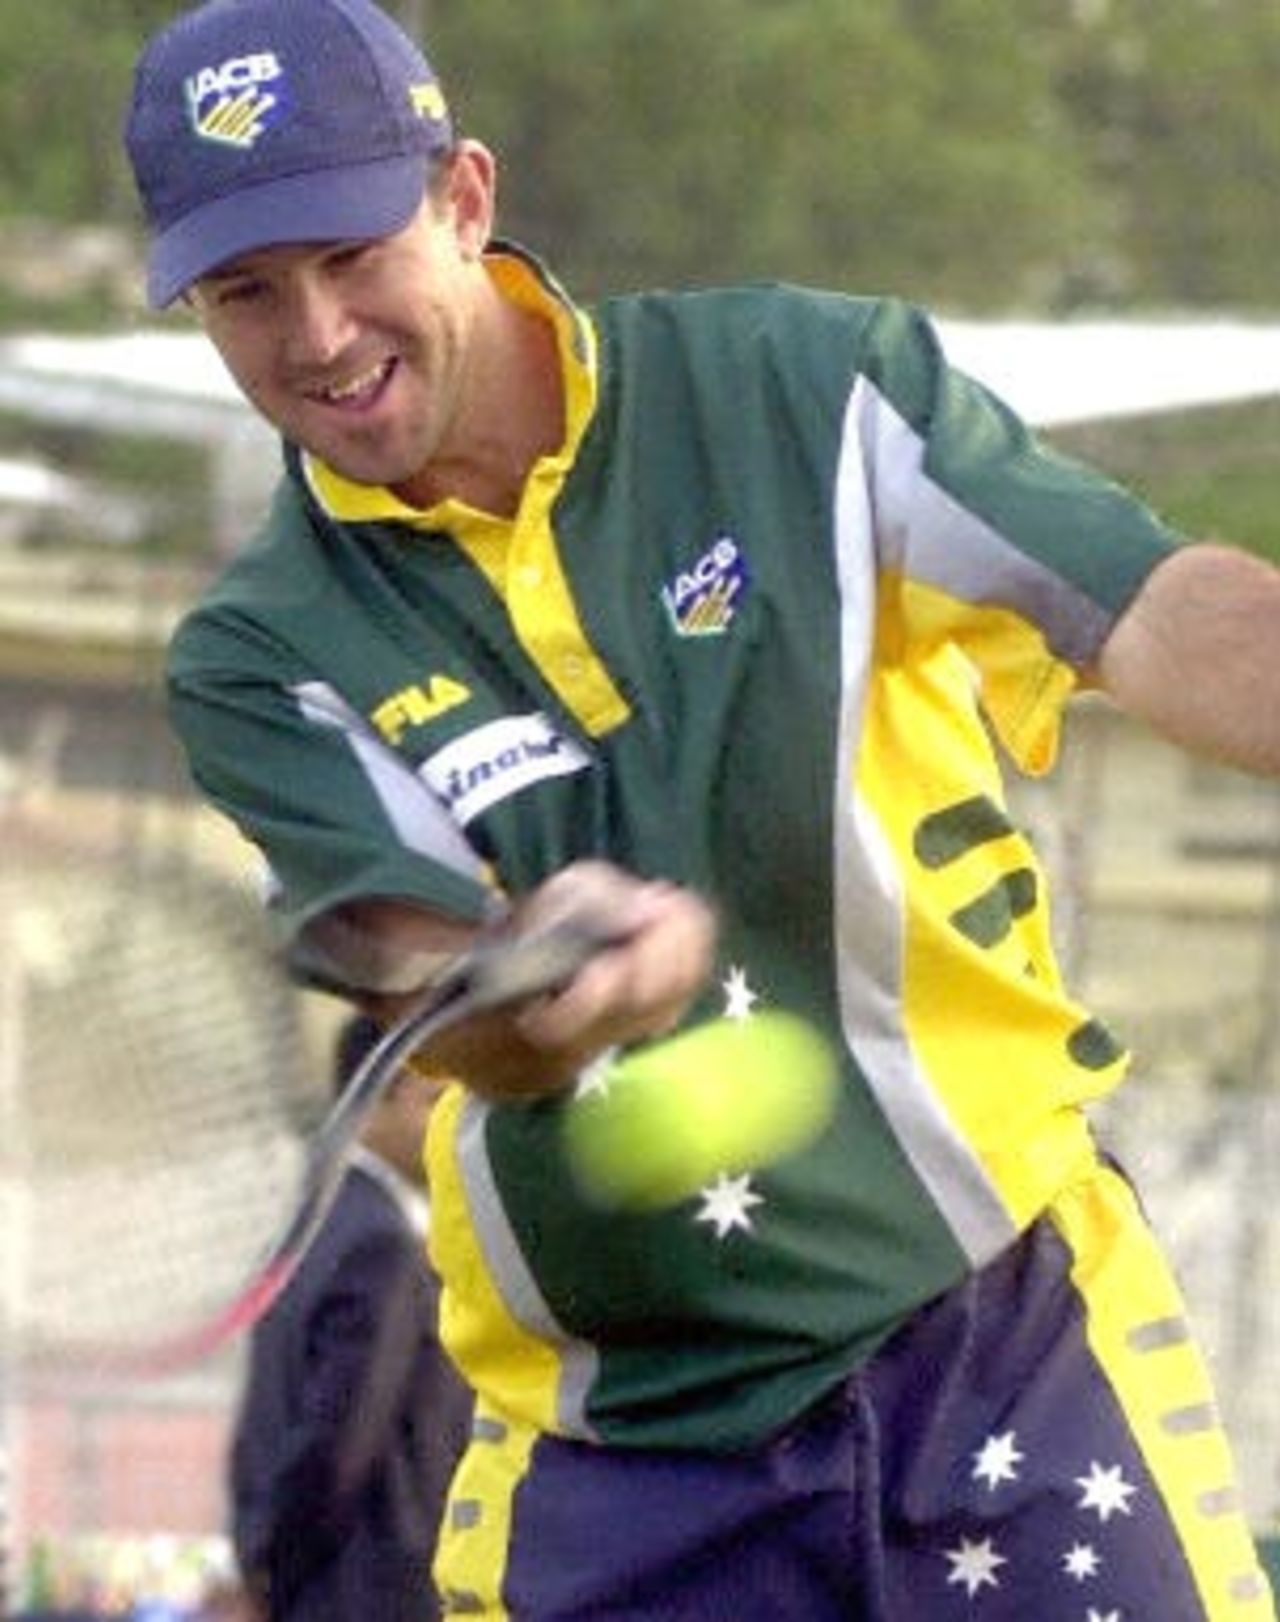 Australian cricket player Ricky Ponting enjoys a session of friendly tennis with teammate Damien Martyn (not pictured) during a net practice session by the Australian team at the Ferozshah Kotla ground in New Delhi, 04 March 2001. Australia will be playing India's Board President's XI team from 06 March 2001 after having already taken a 1-0 lead in the three Test match series against India.